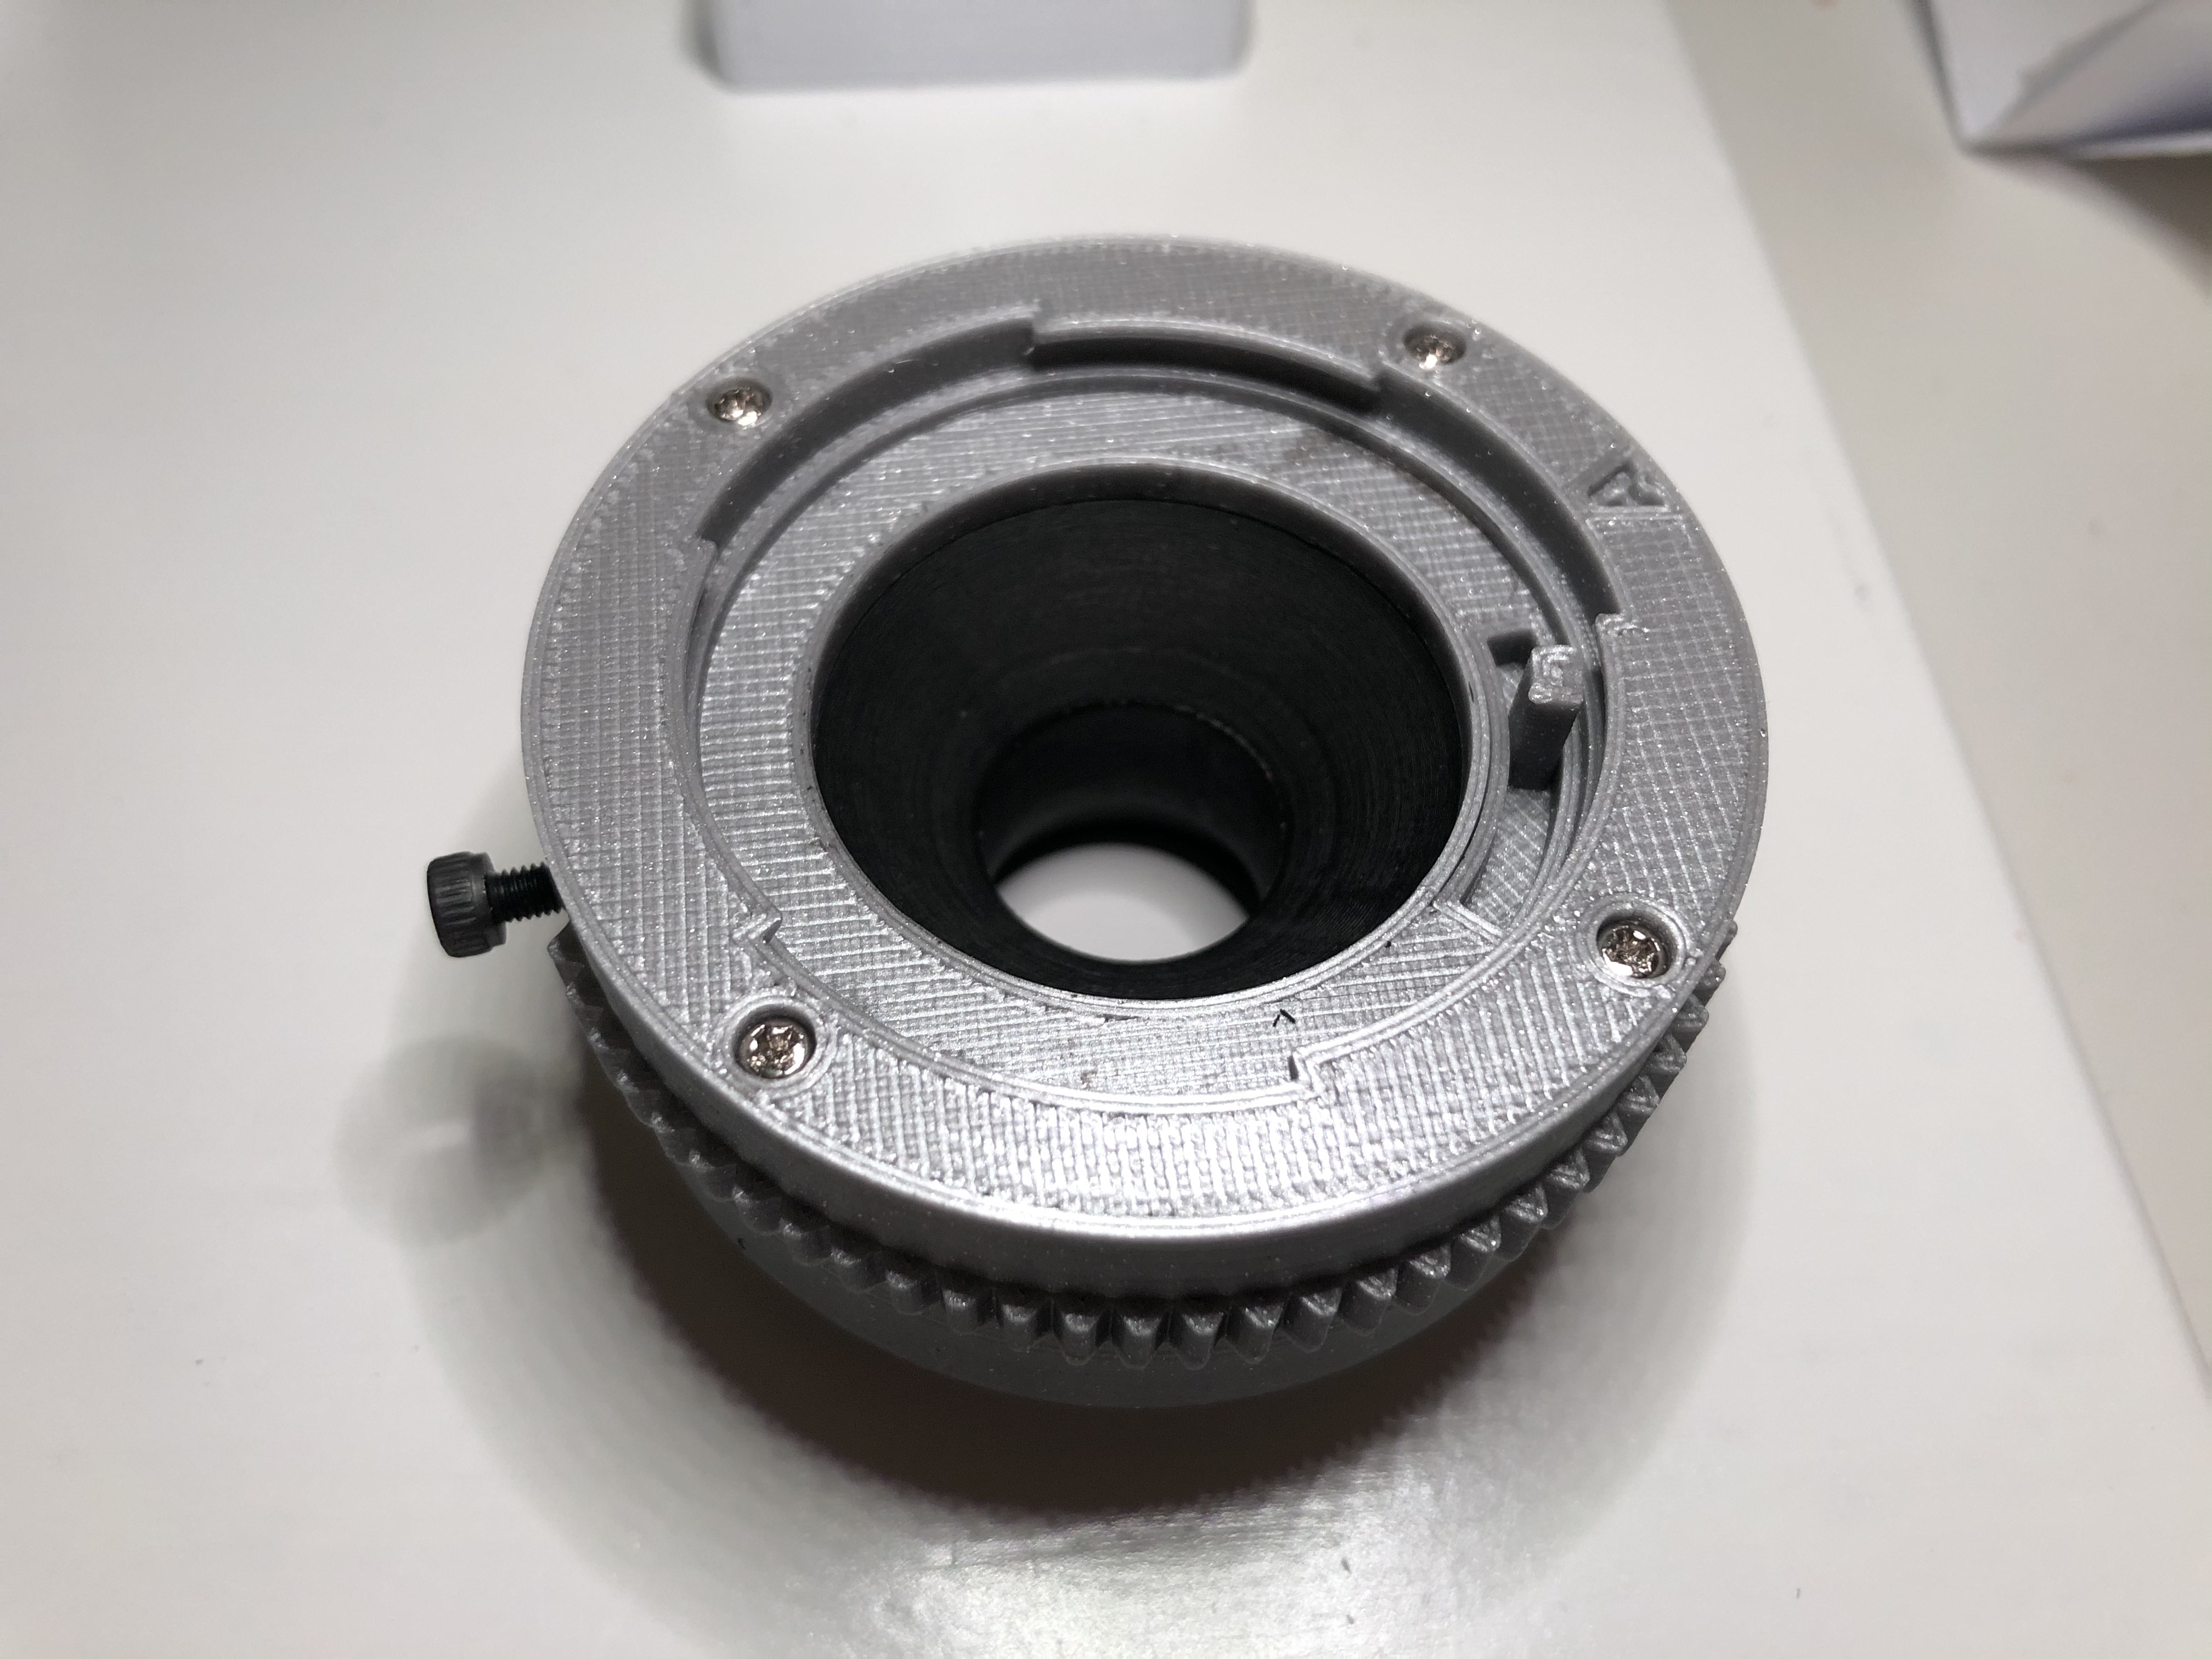 A-mount to C-mount lens adaptor